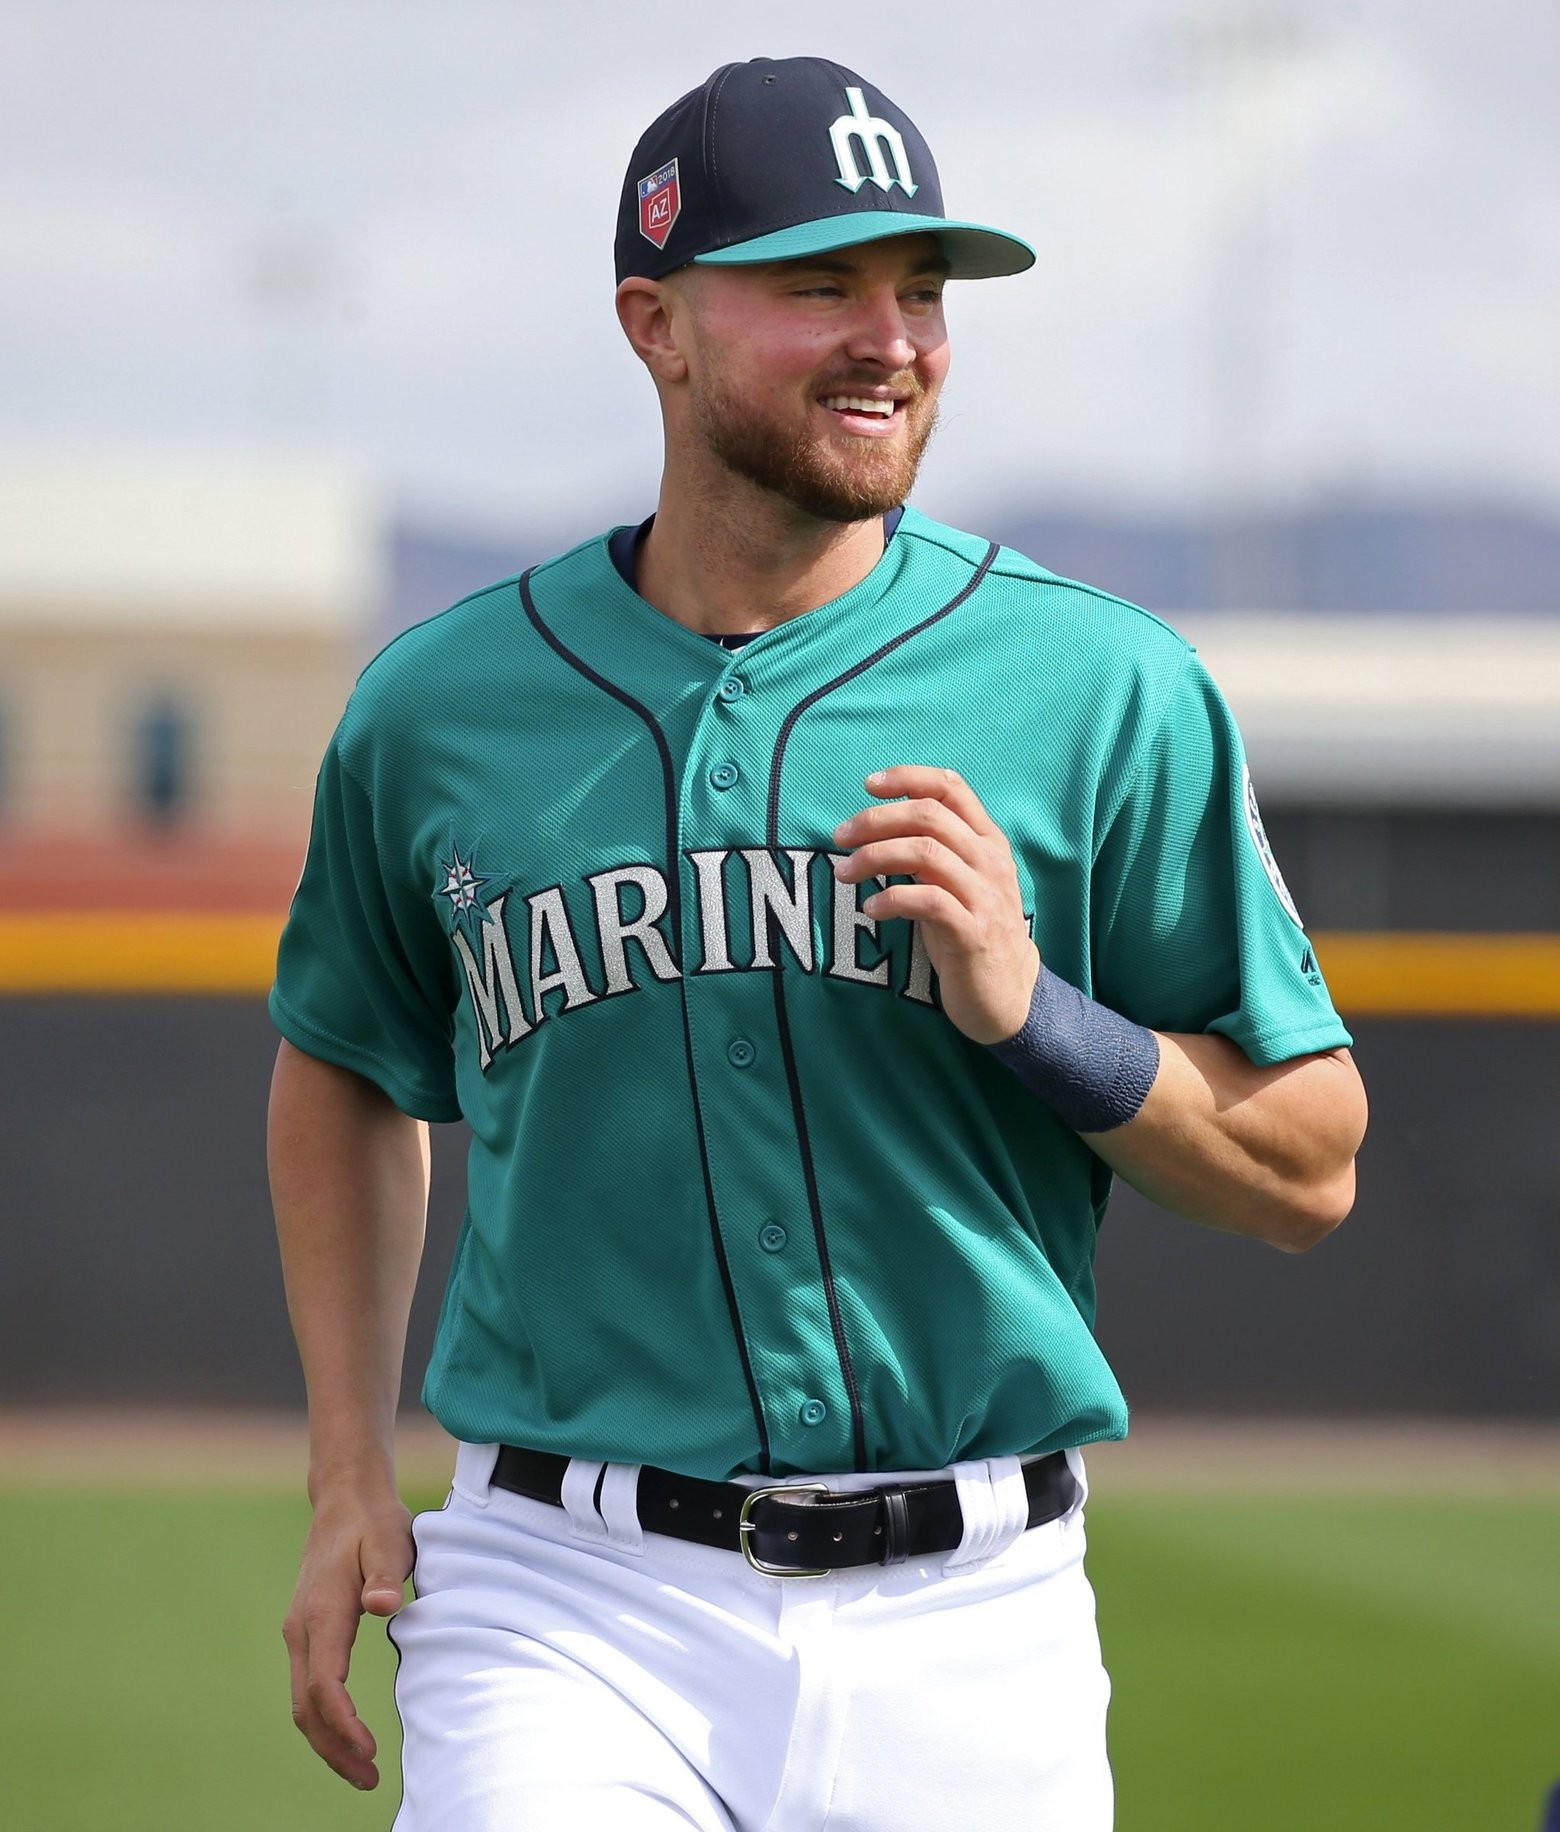 Michael Marjama on making the Mariners’ opening day roster ‘Really